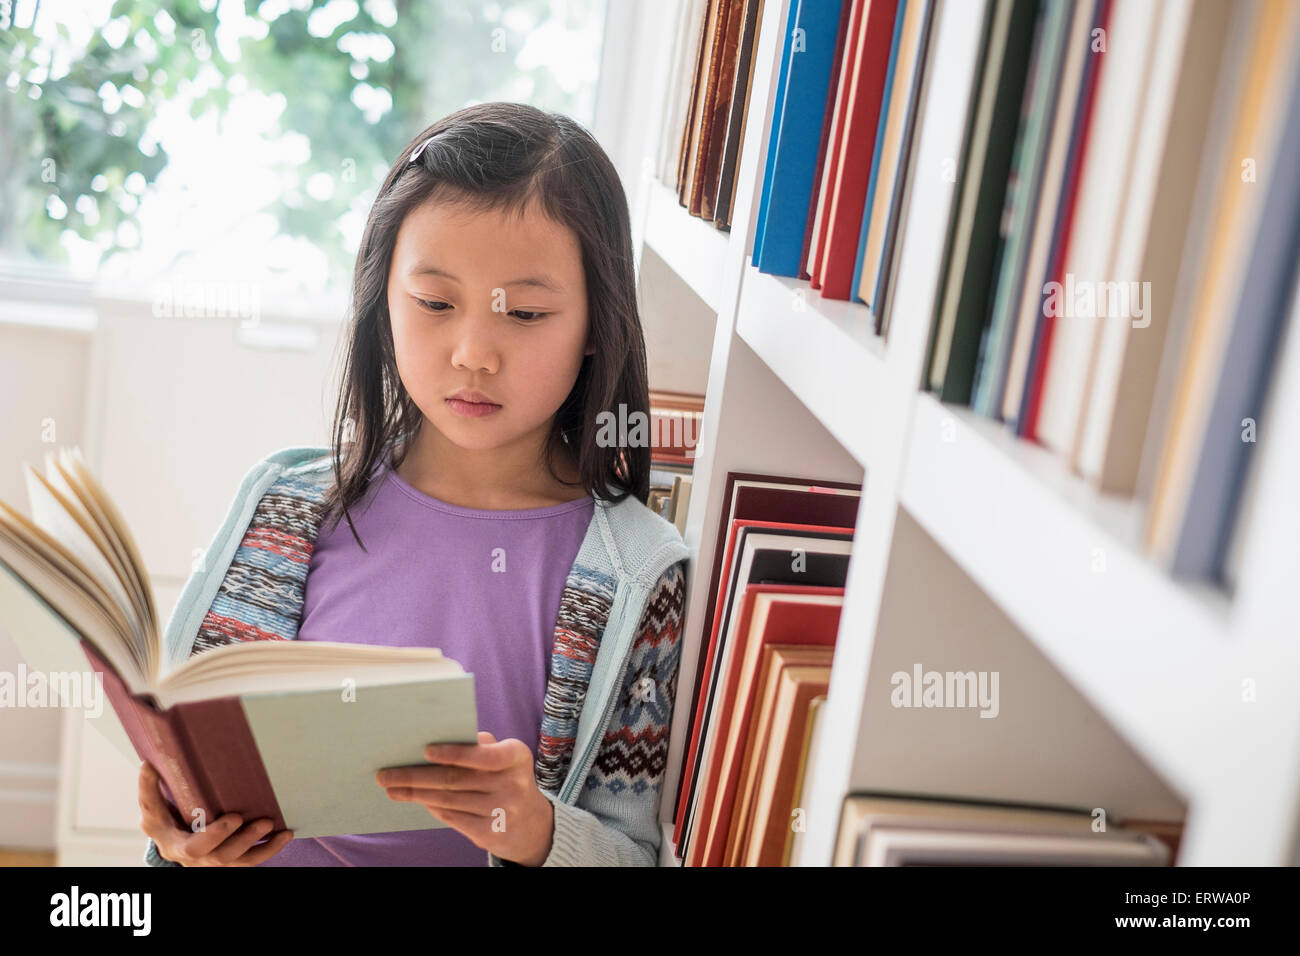 Chinese student reading book near library bookcase Stock Photo